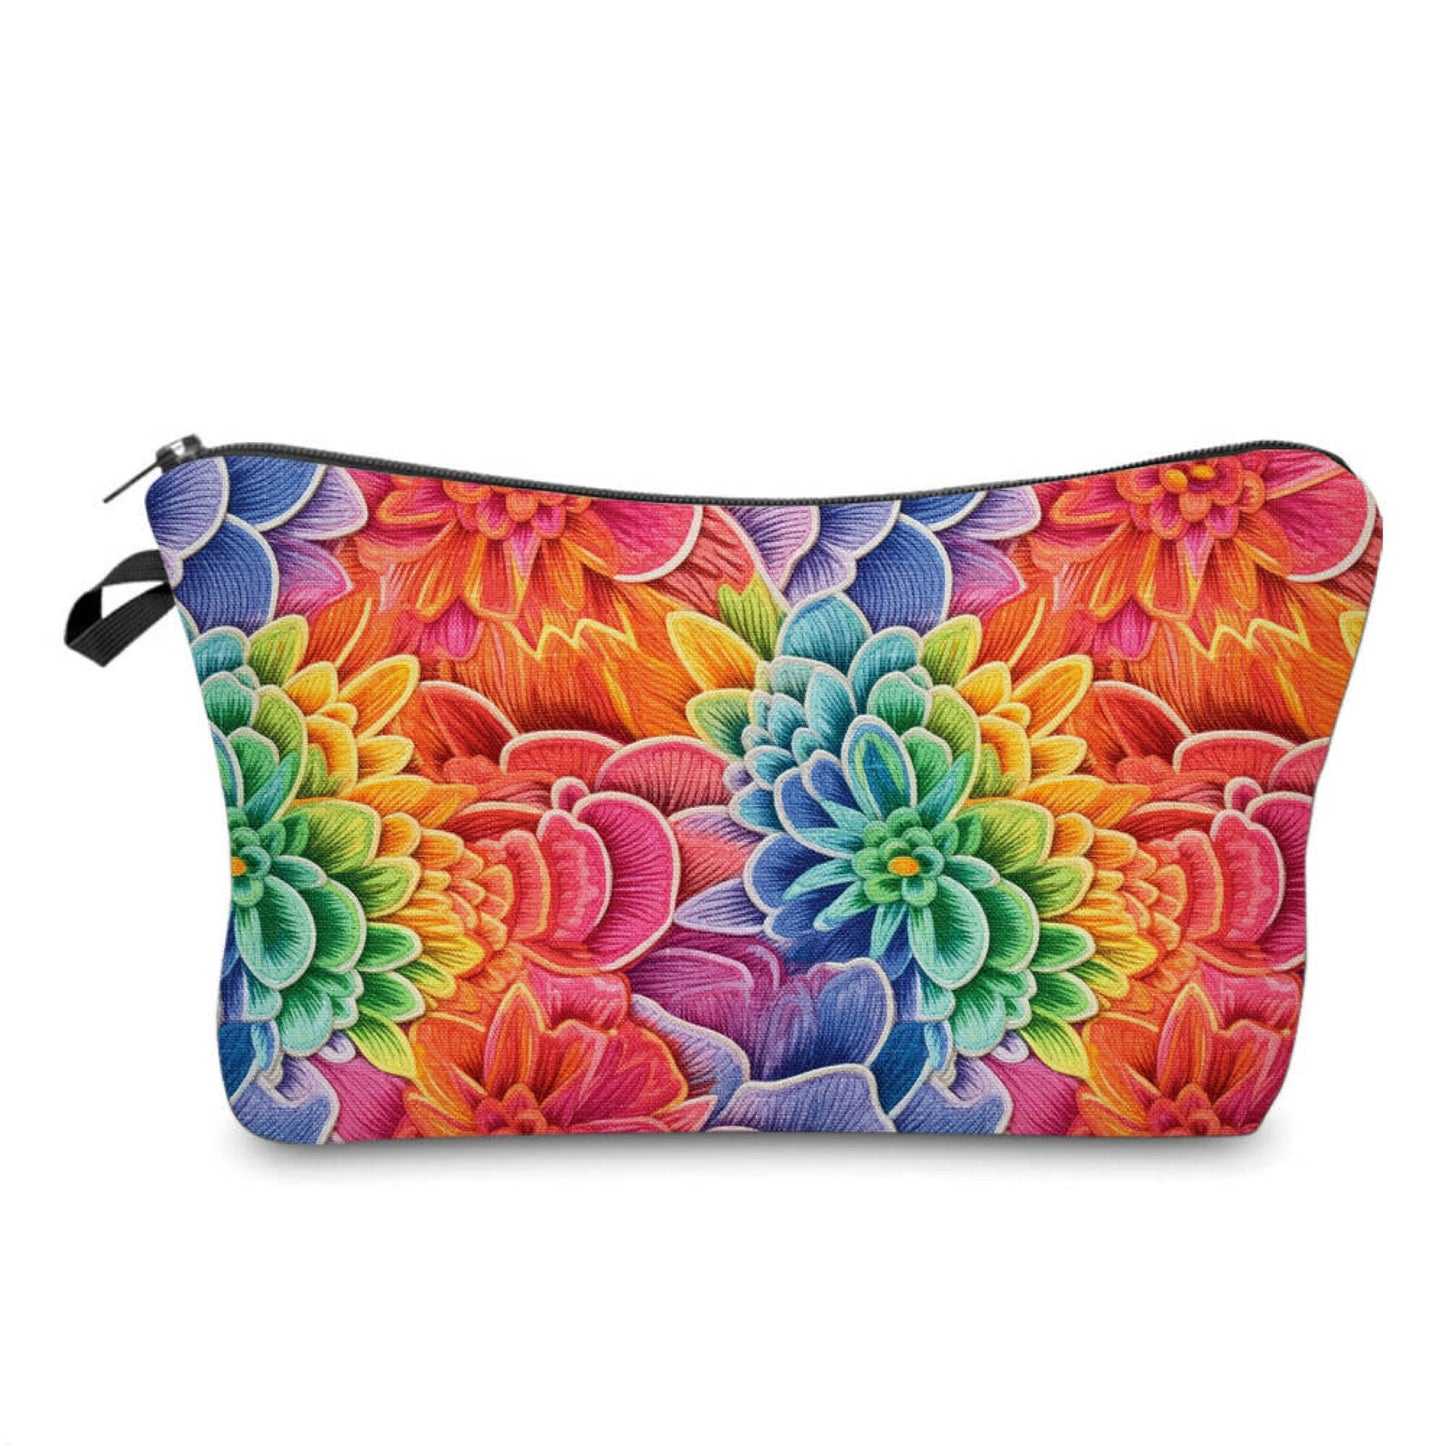 Pouch - Floral, Bright Colorful Embroidery - Three Bears Boutique